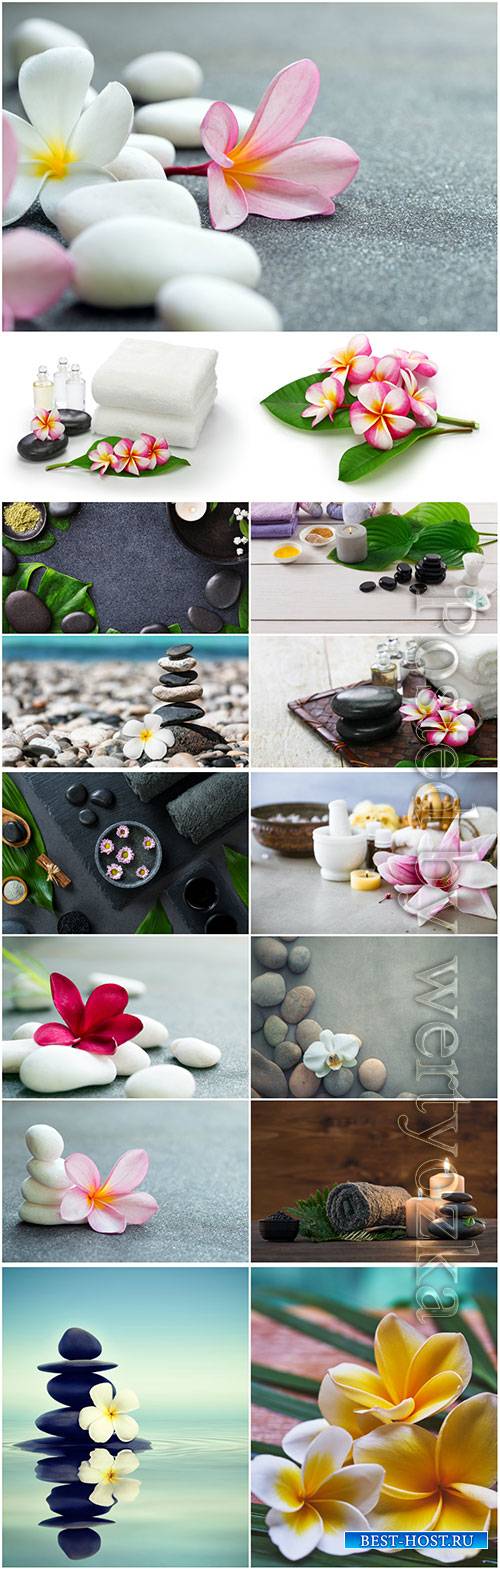 Spa backgrounds, compositions beautiful stock photo